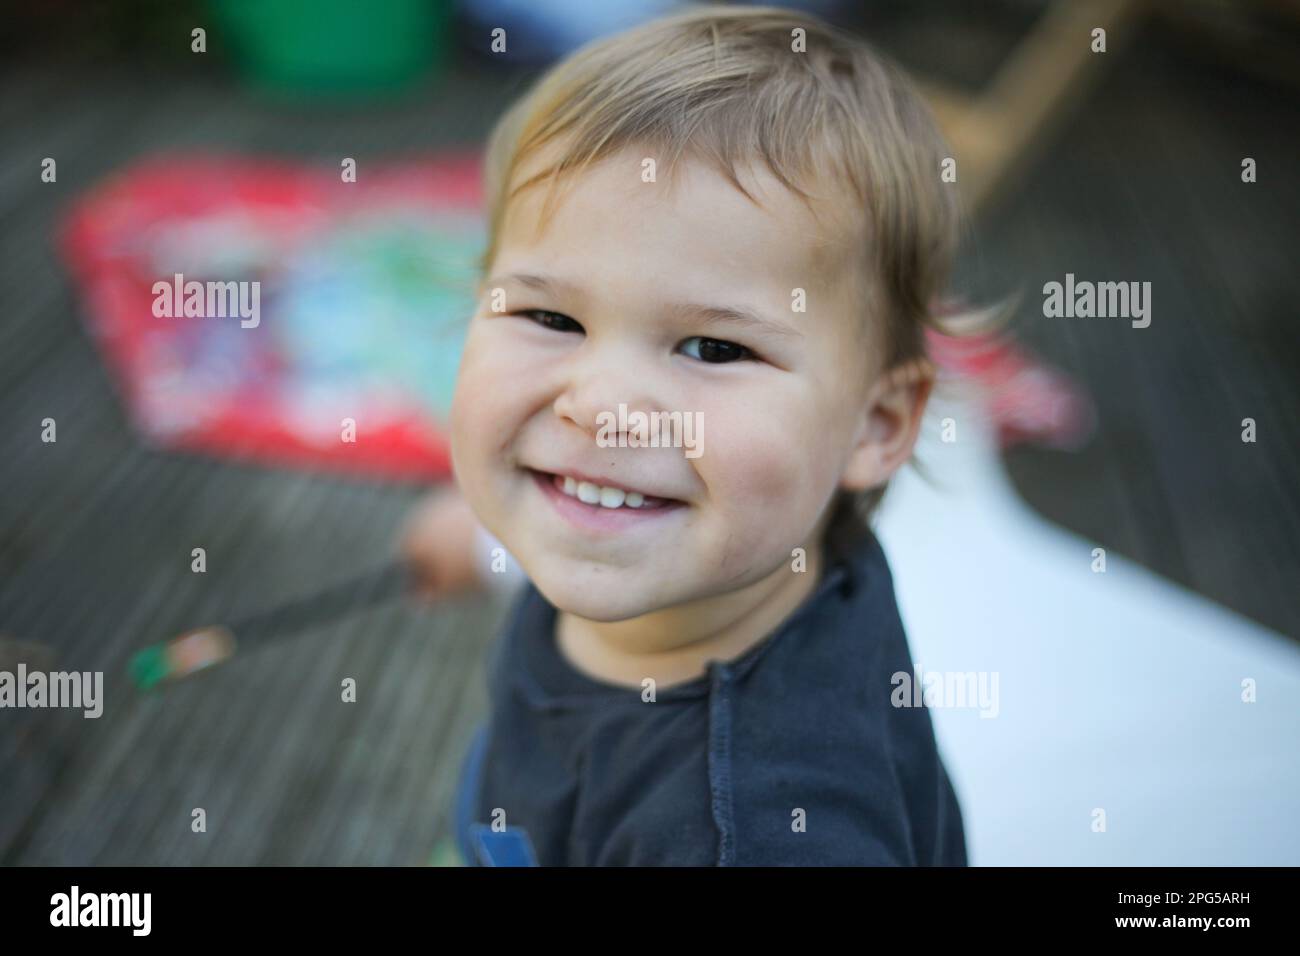 Happy baby sitting outdoors smiling Stock Photo